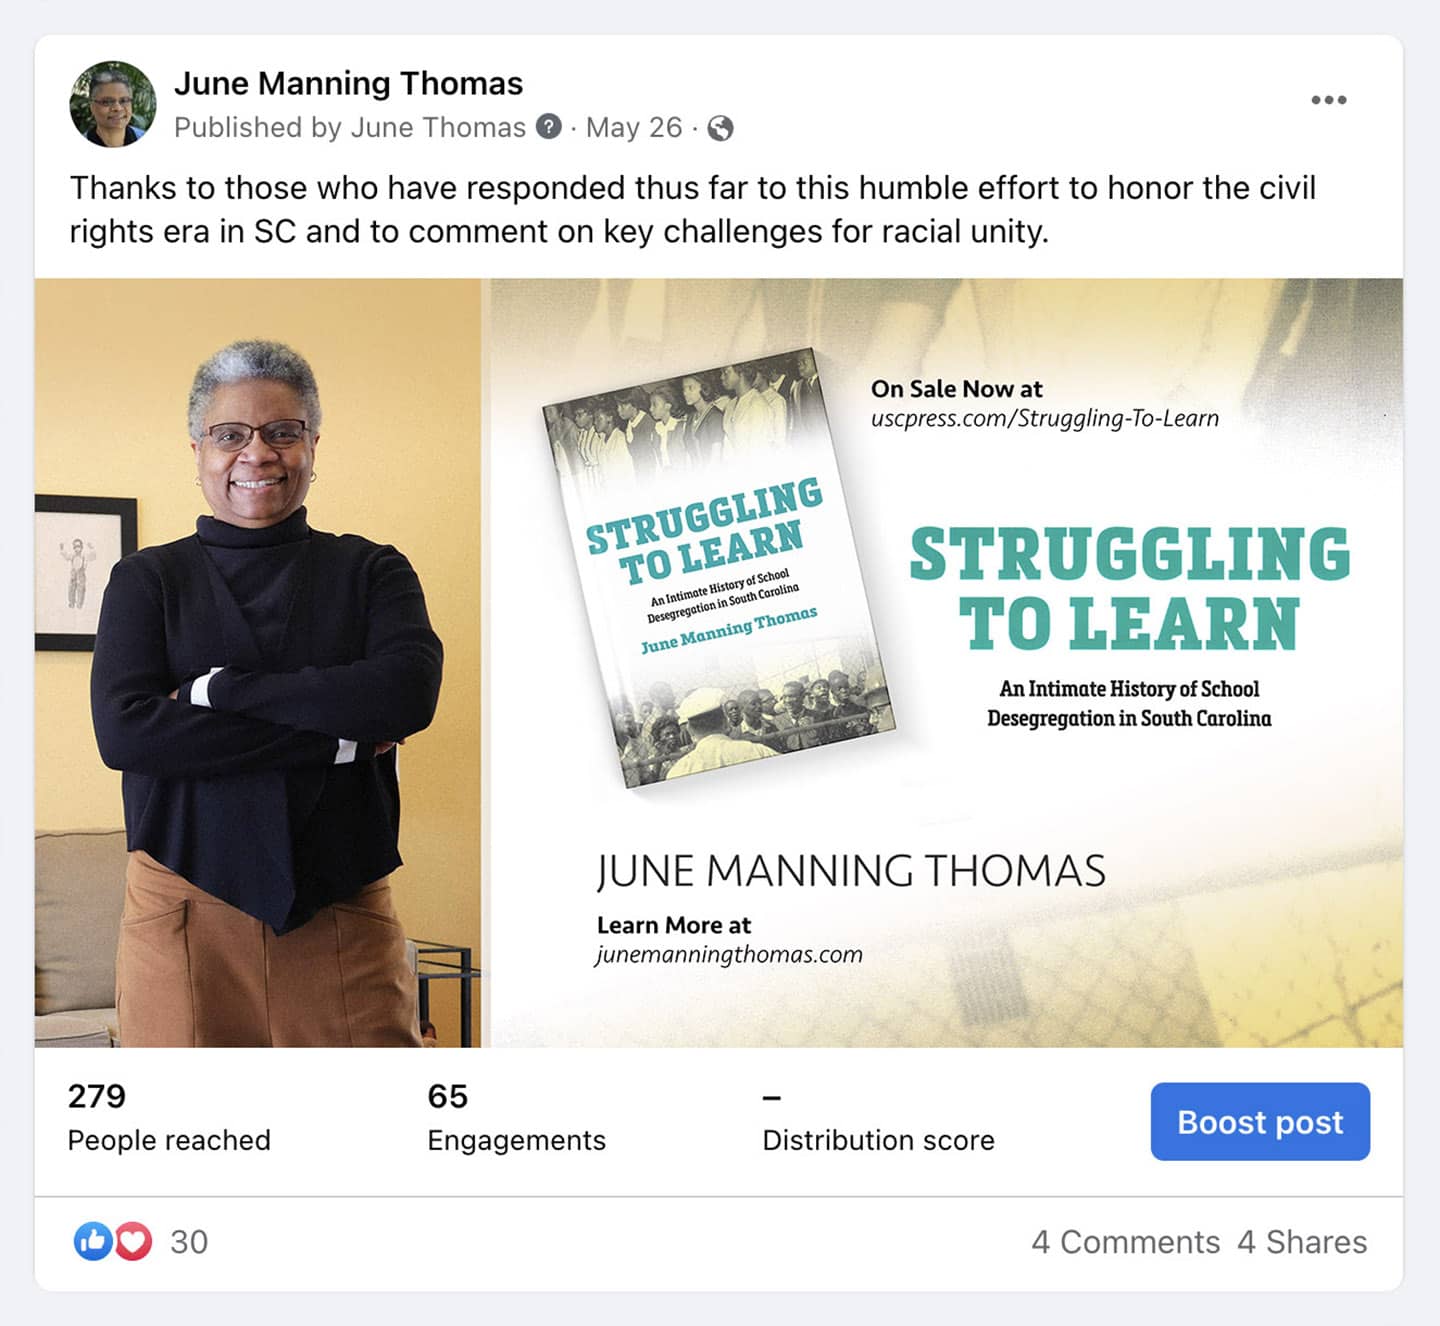 A Facebook post from June Manning Thomas